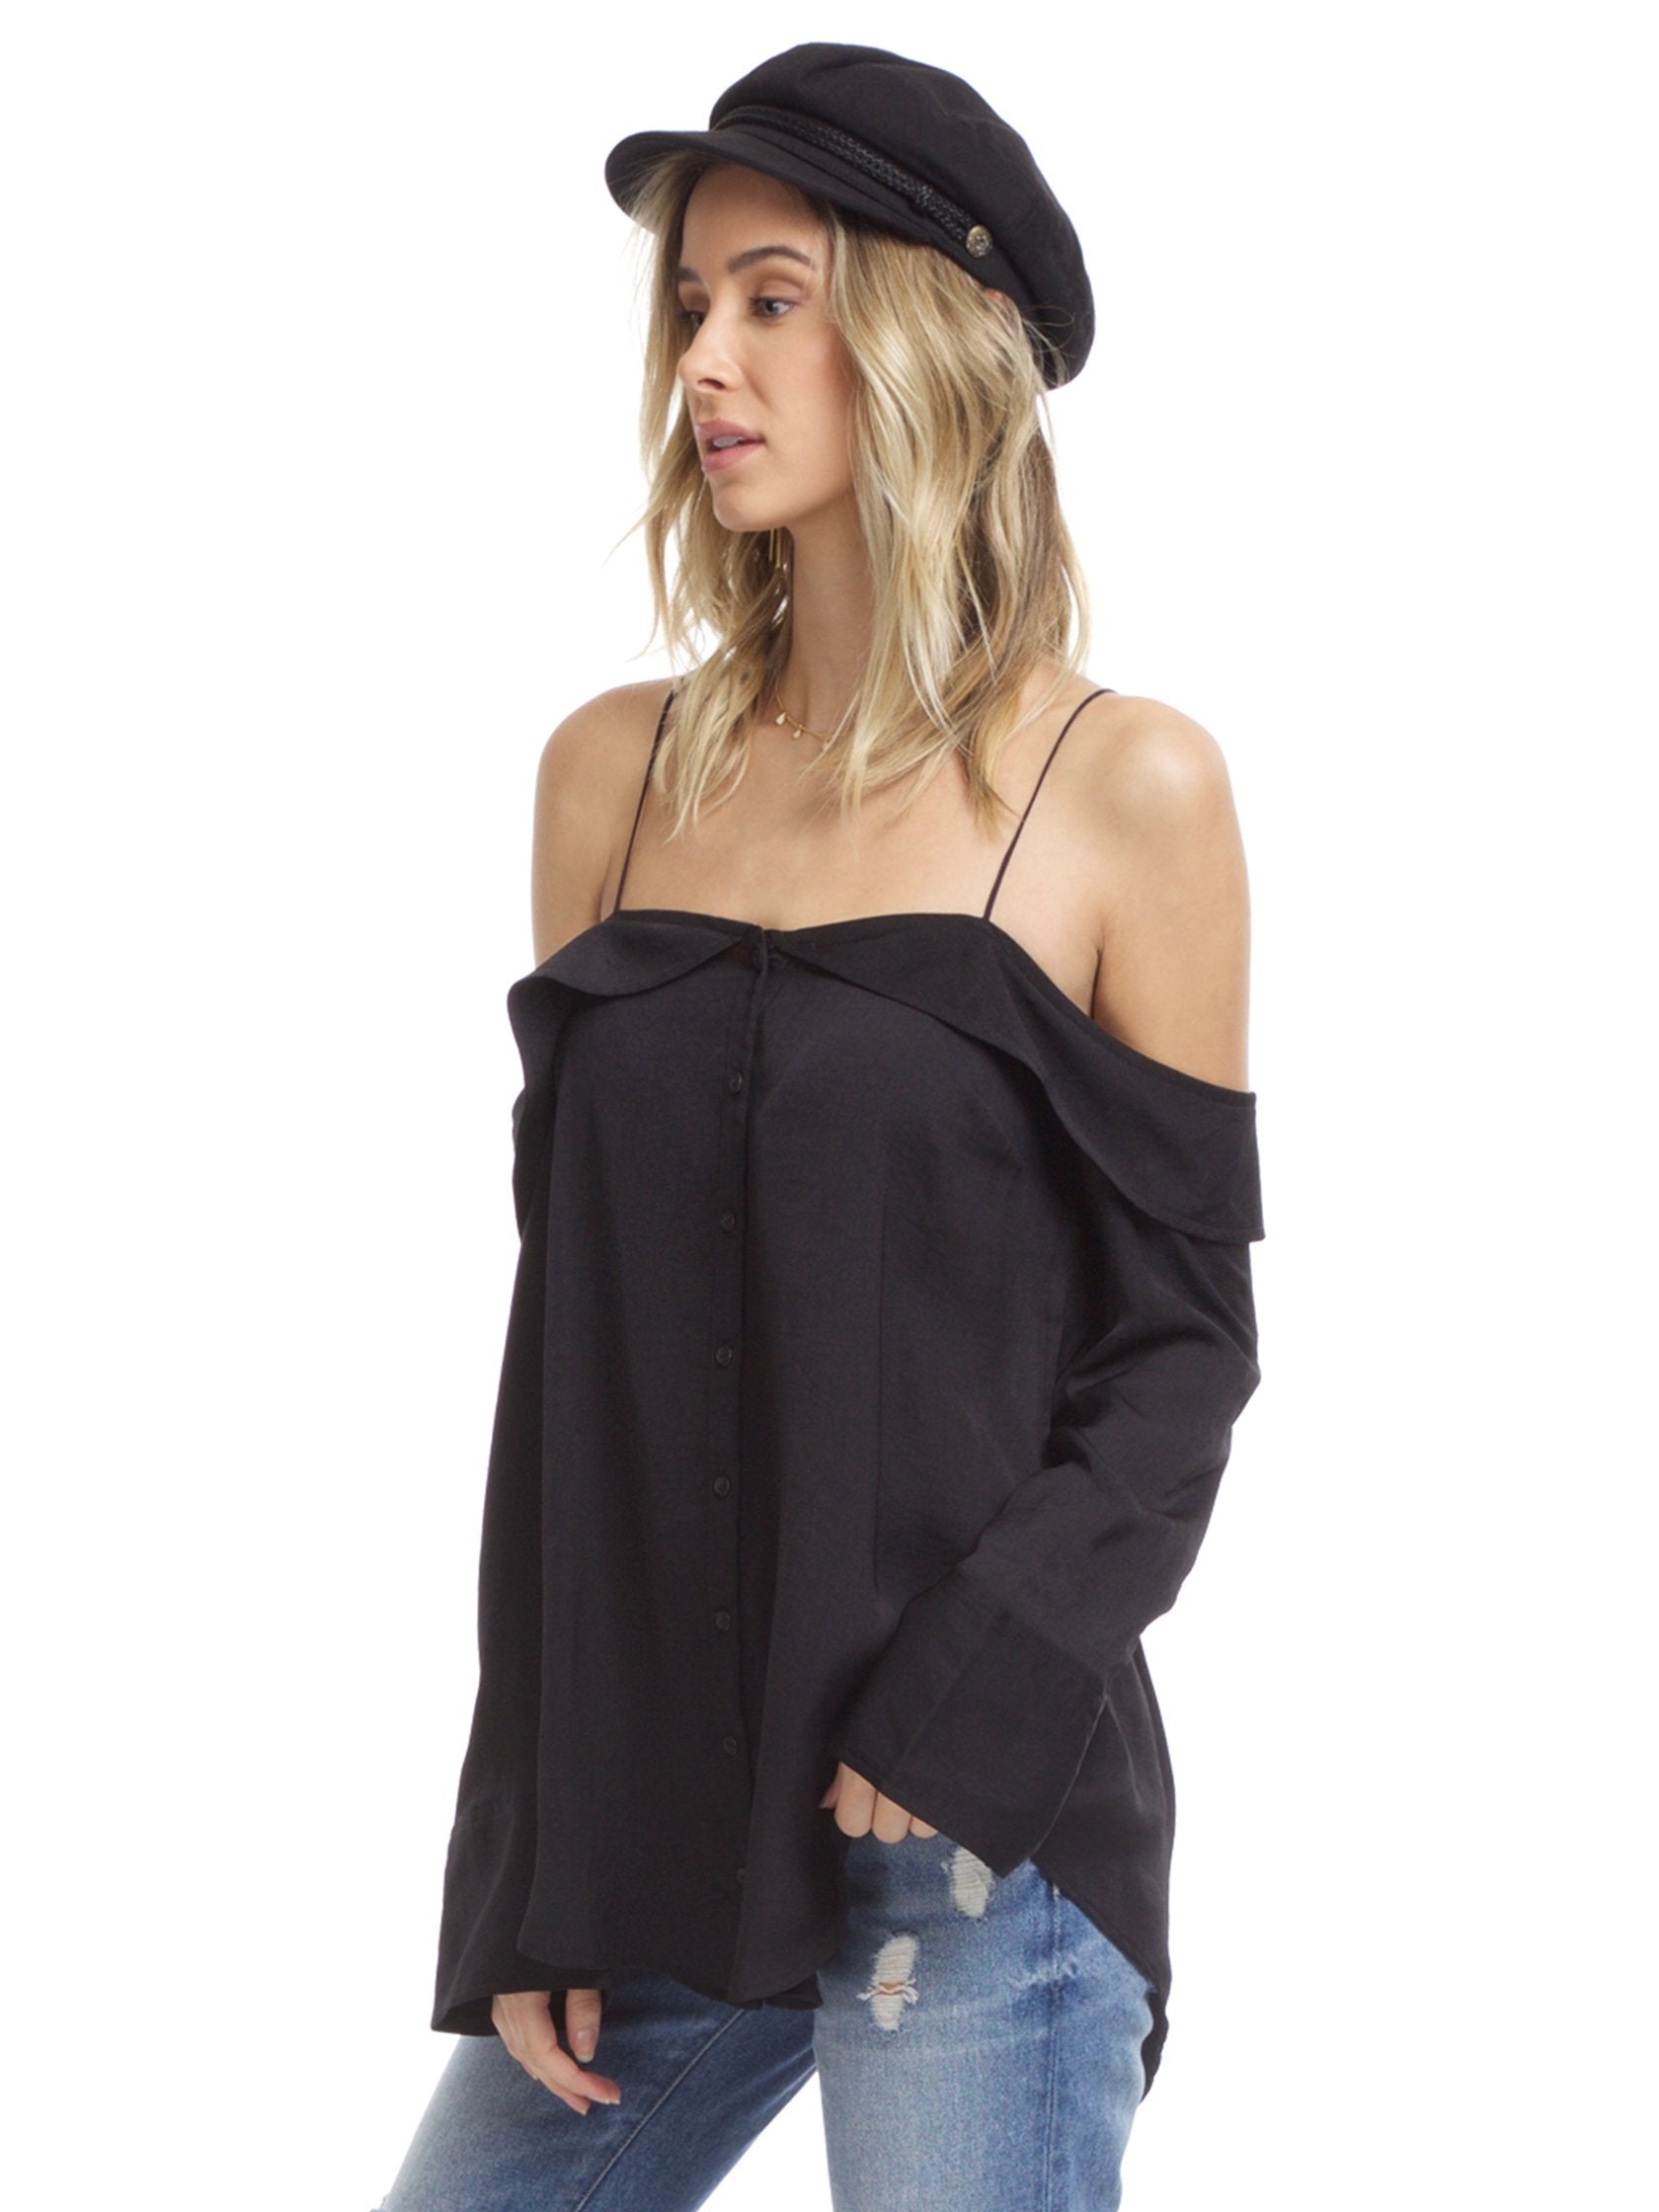 Women wearing a top rental from Free People called Walk This Way Buttondown Top